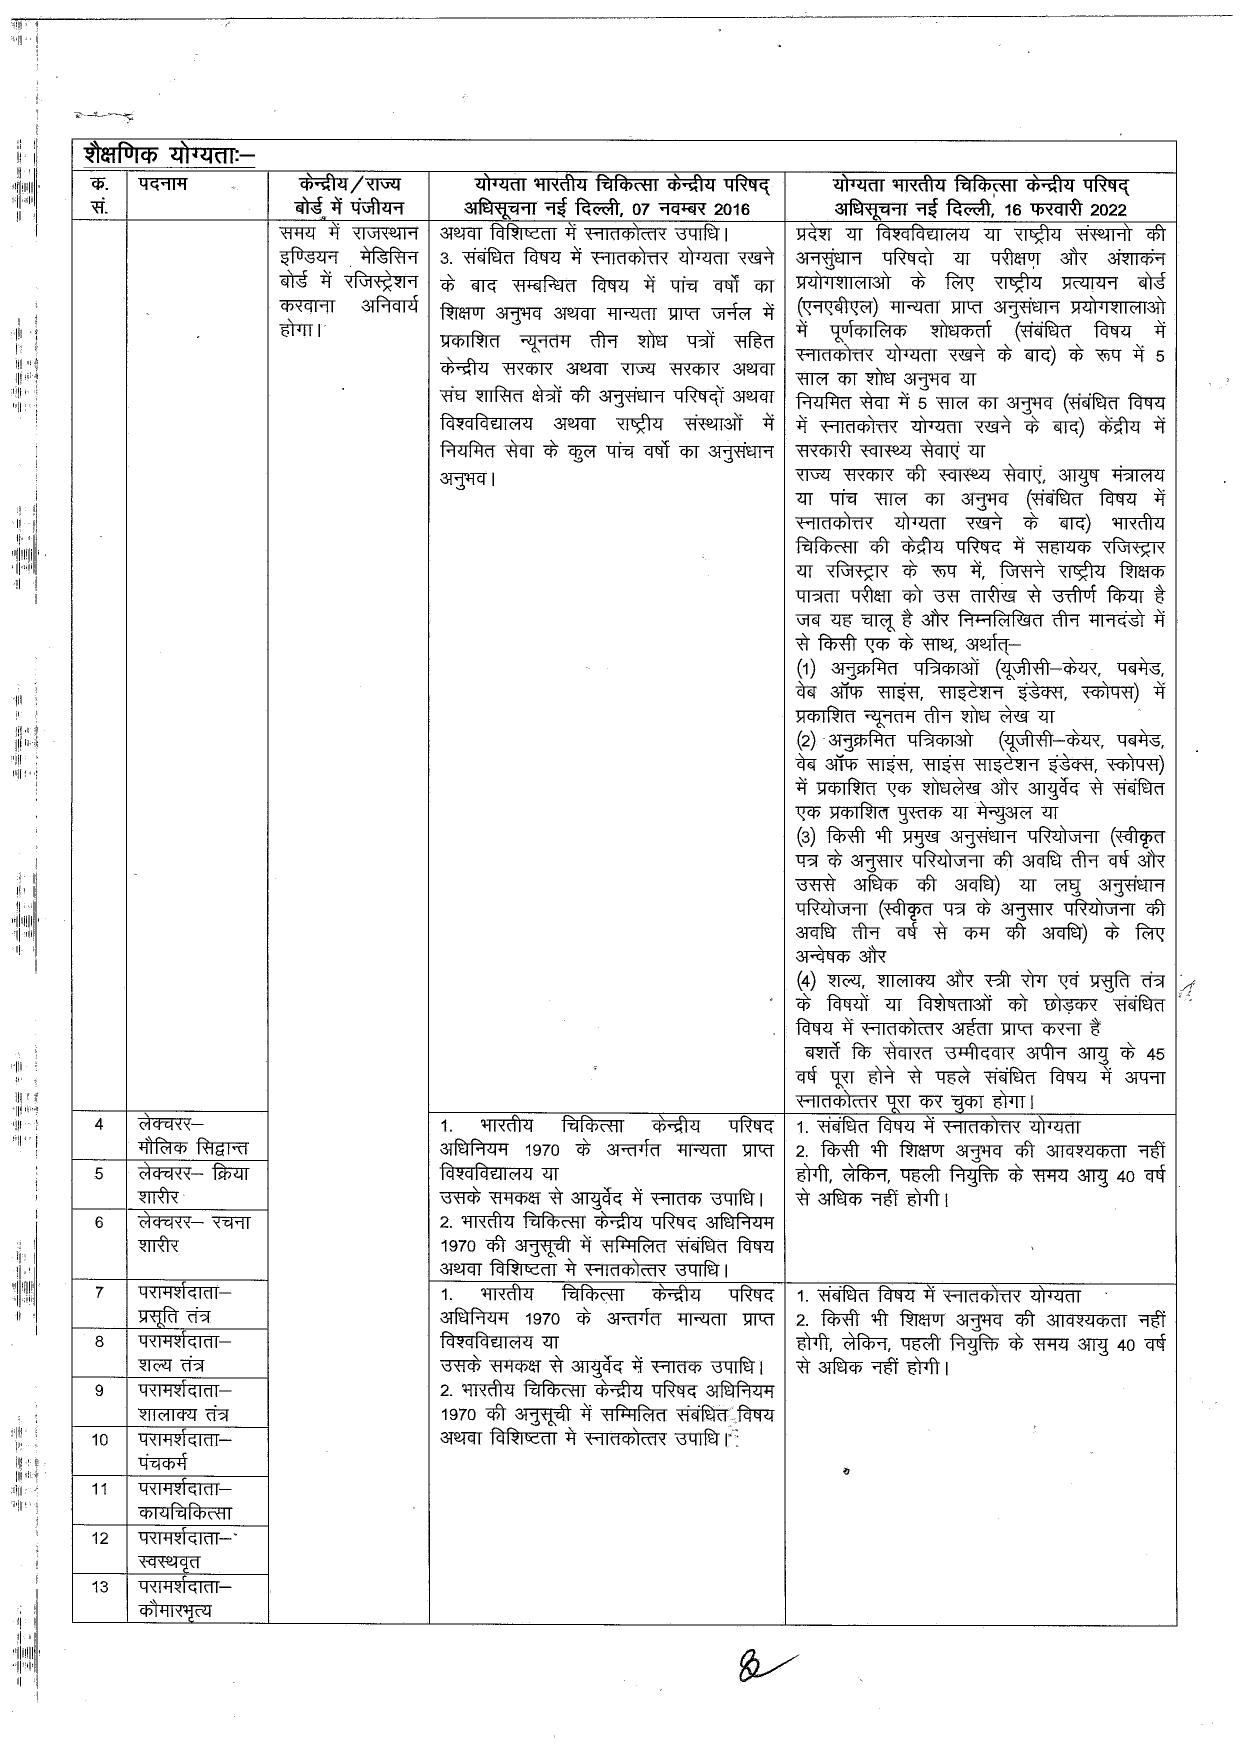 Ayurveda Department Rajasthan Lecturer, Assistant Teacher and Various Posts Recruitment 2023 - Page 23